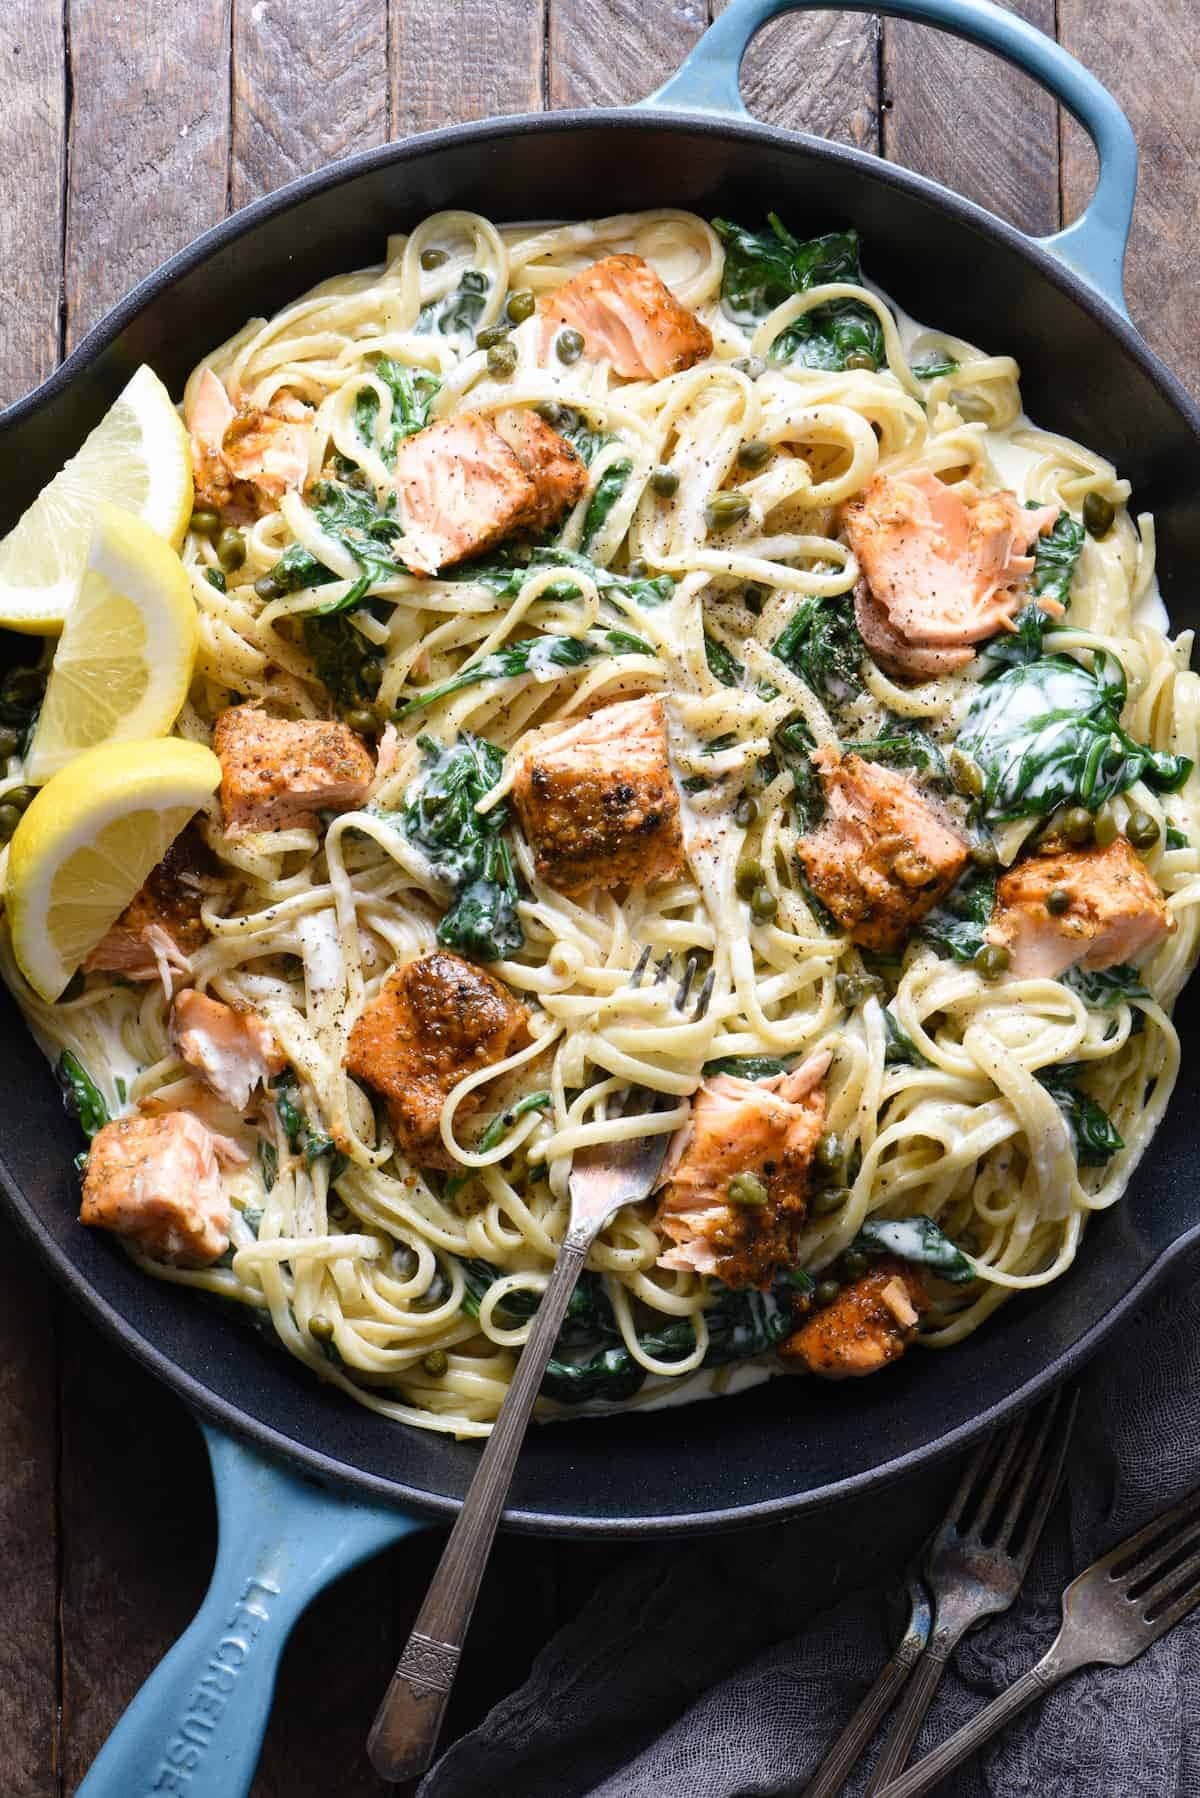 Pasta on skillet made with linguine, spinach, and salmon filets.